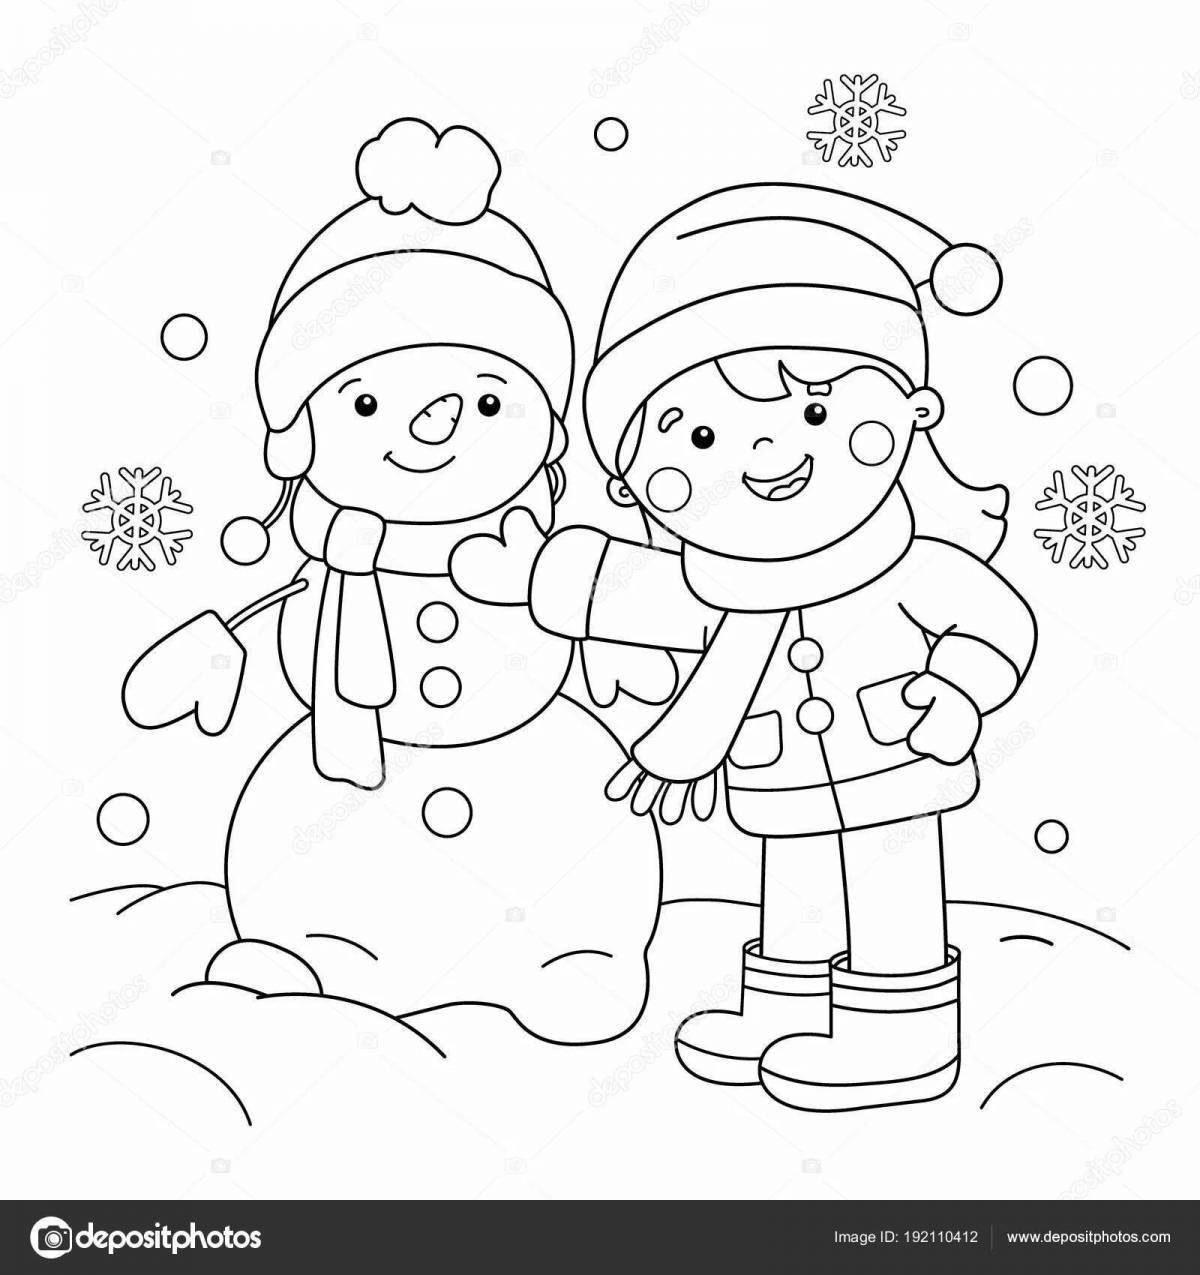 Wonderful winter coloring book for children 6-7 years old